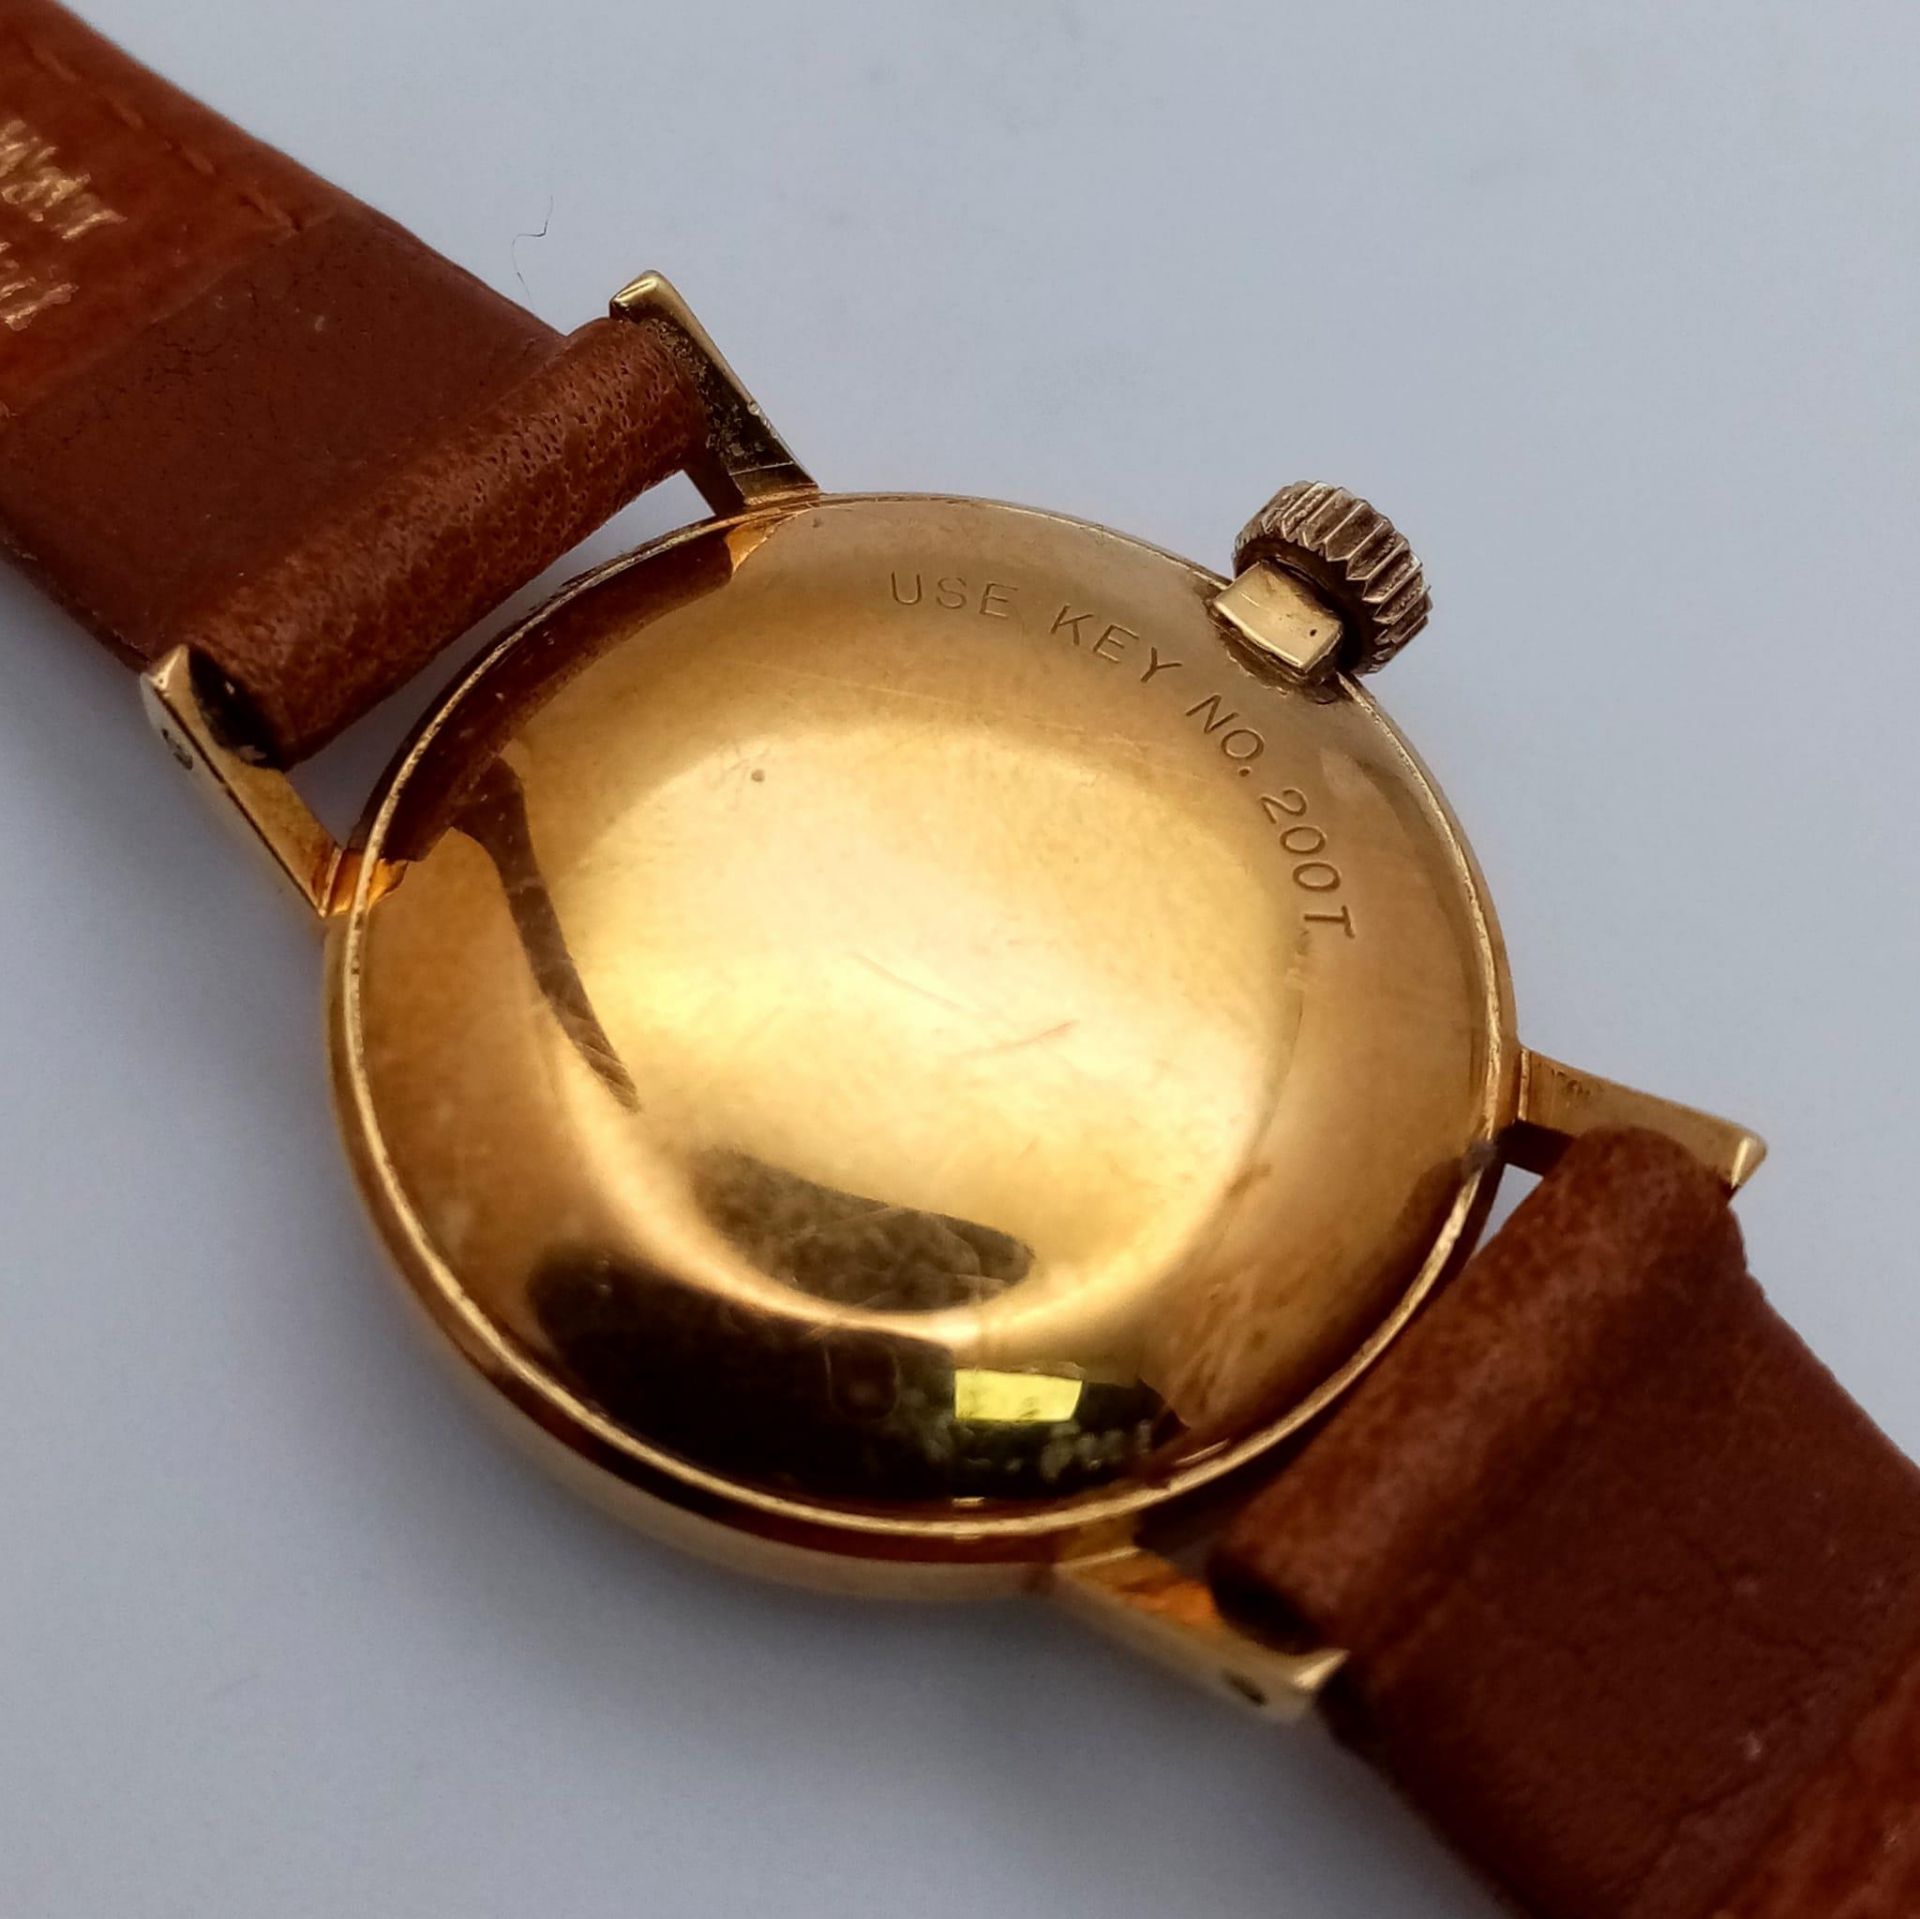 A Lovely Vintage 18K Gold Cased Tissot Ladies Watch. Brown leather strap. 18k gold inner - Image 5 of 6